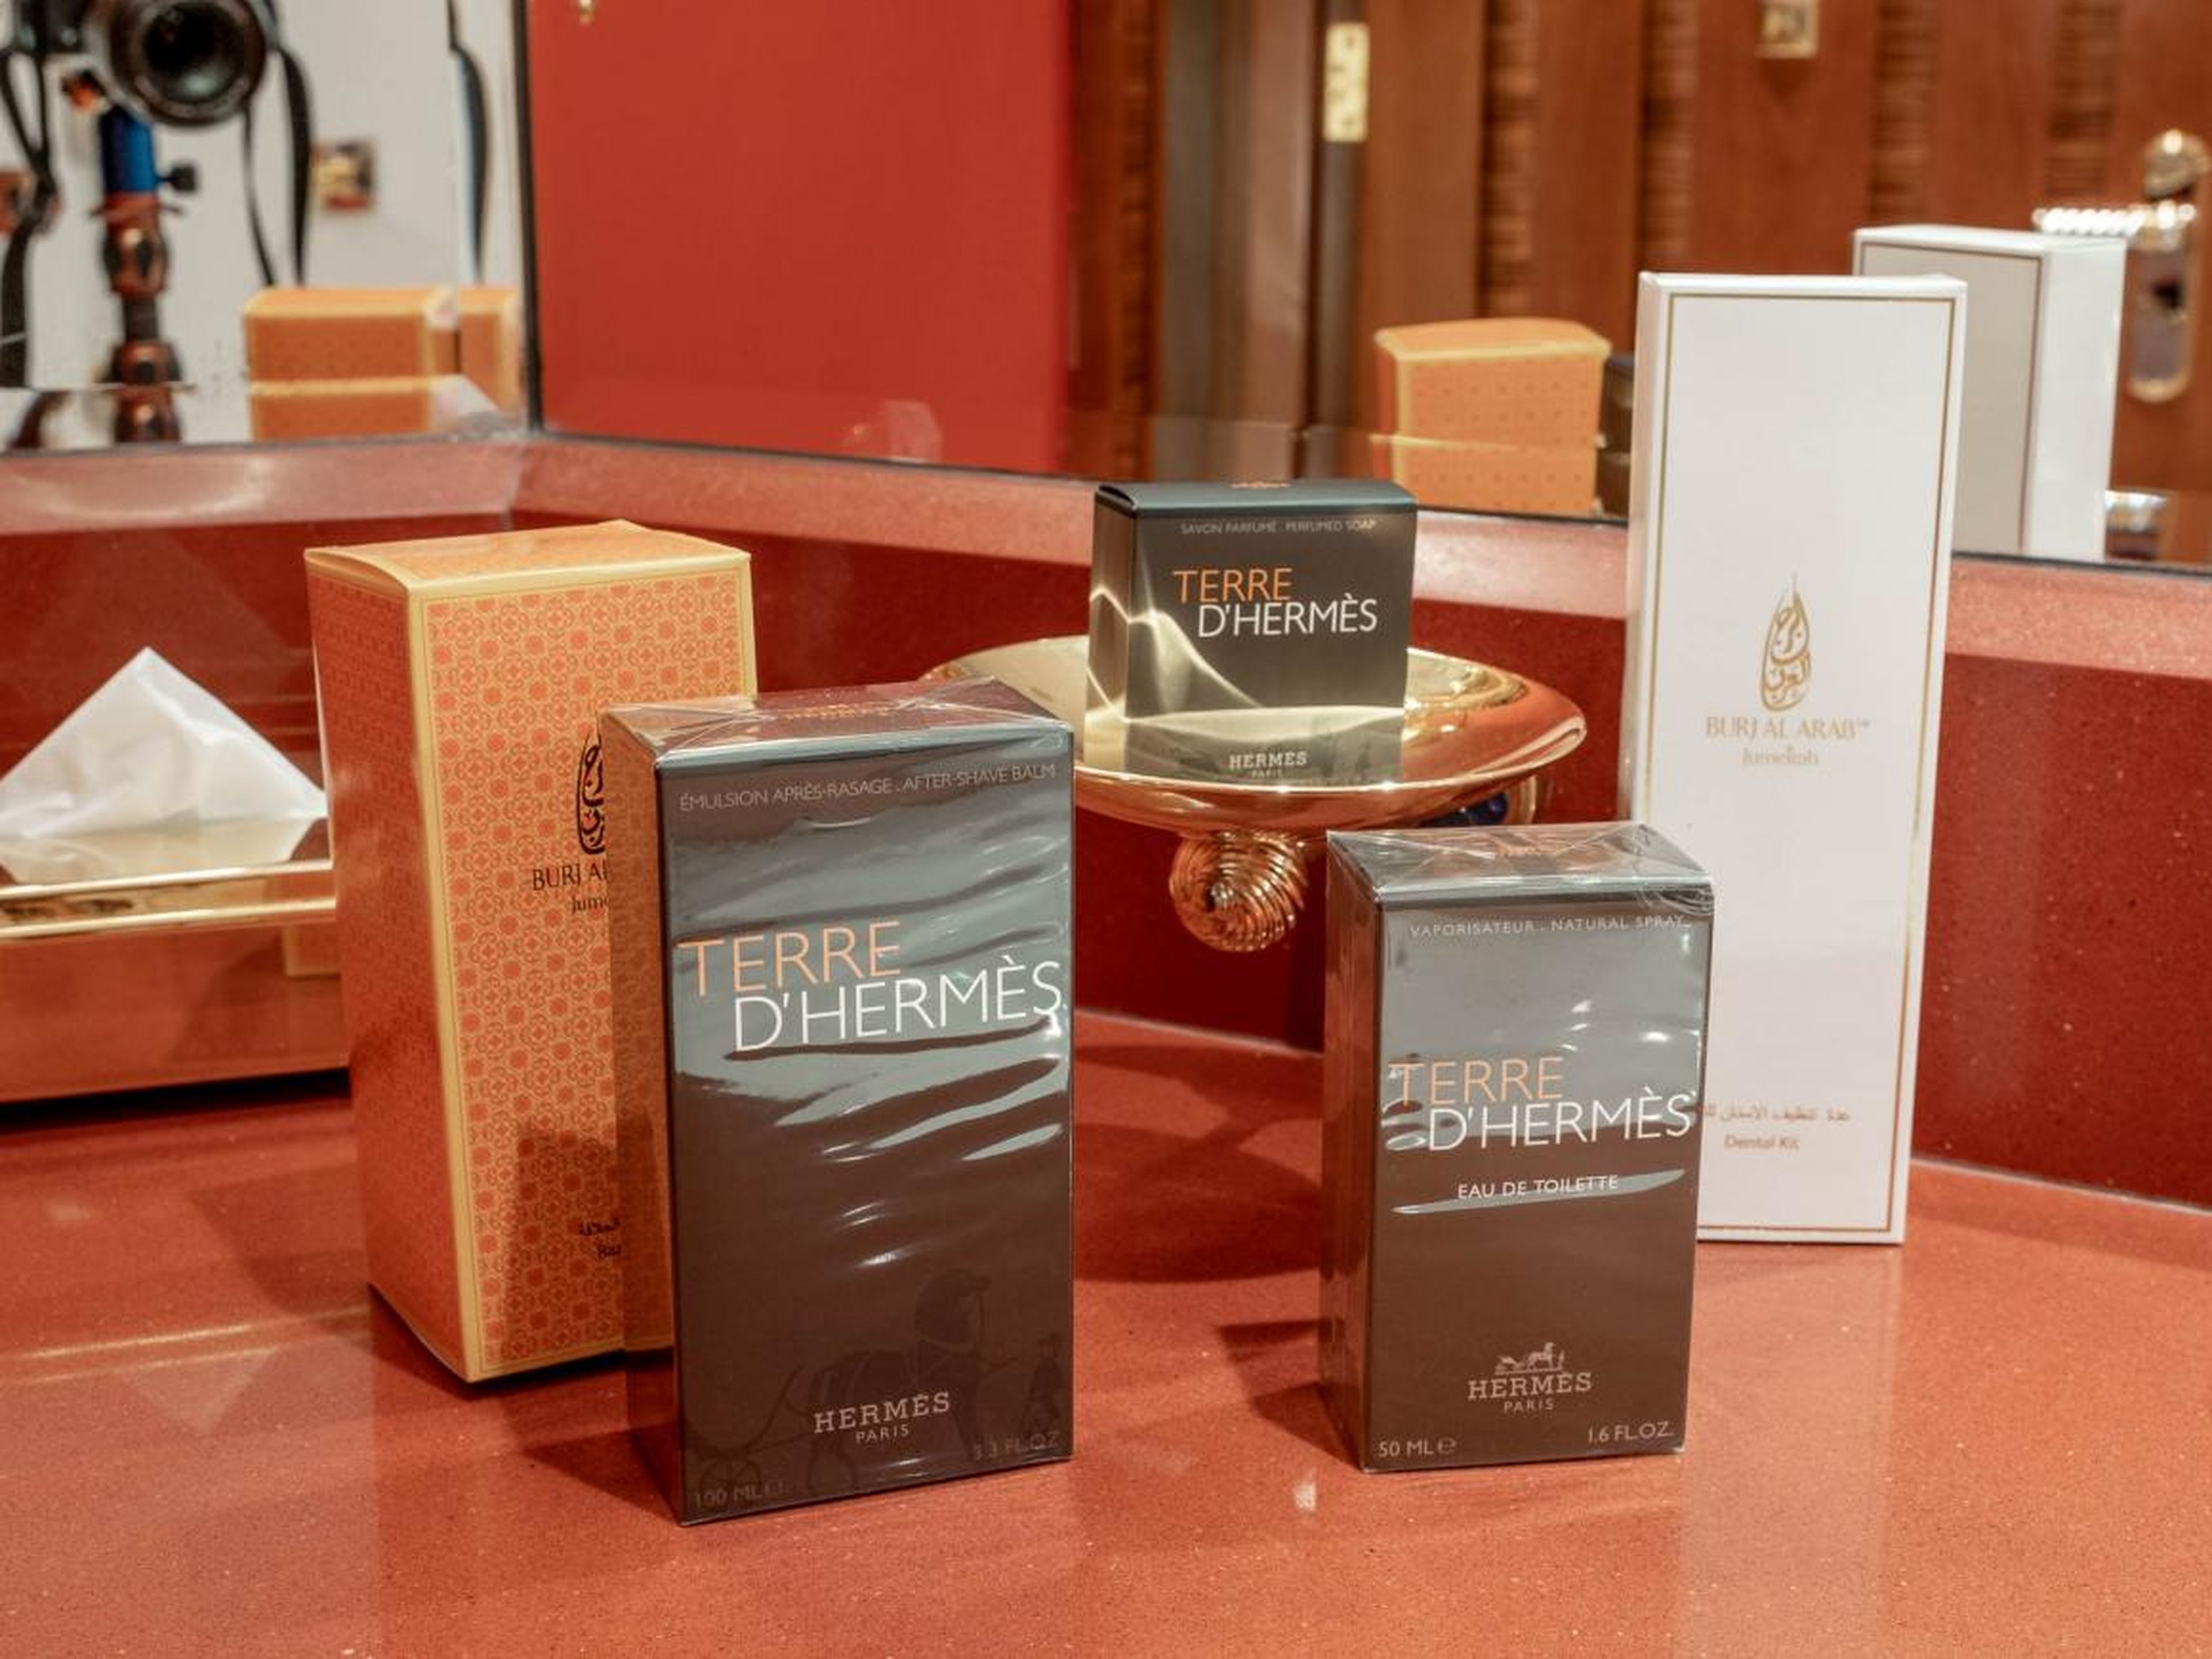 ... but it's not the set of full-size his-and-hers Hermès toiletries, including cologne and perfume, that each Burj room comes with. I kept the bar of Hermès body soap and stuck it in my suitcase. All my clothes now smell like